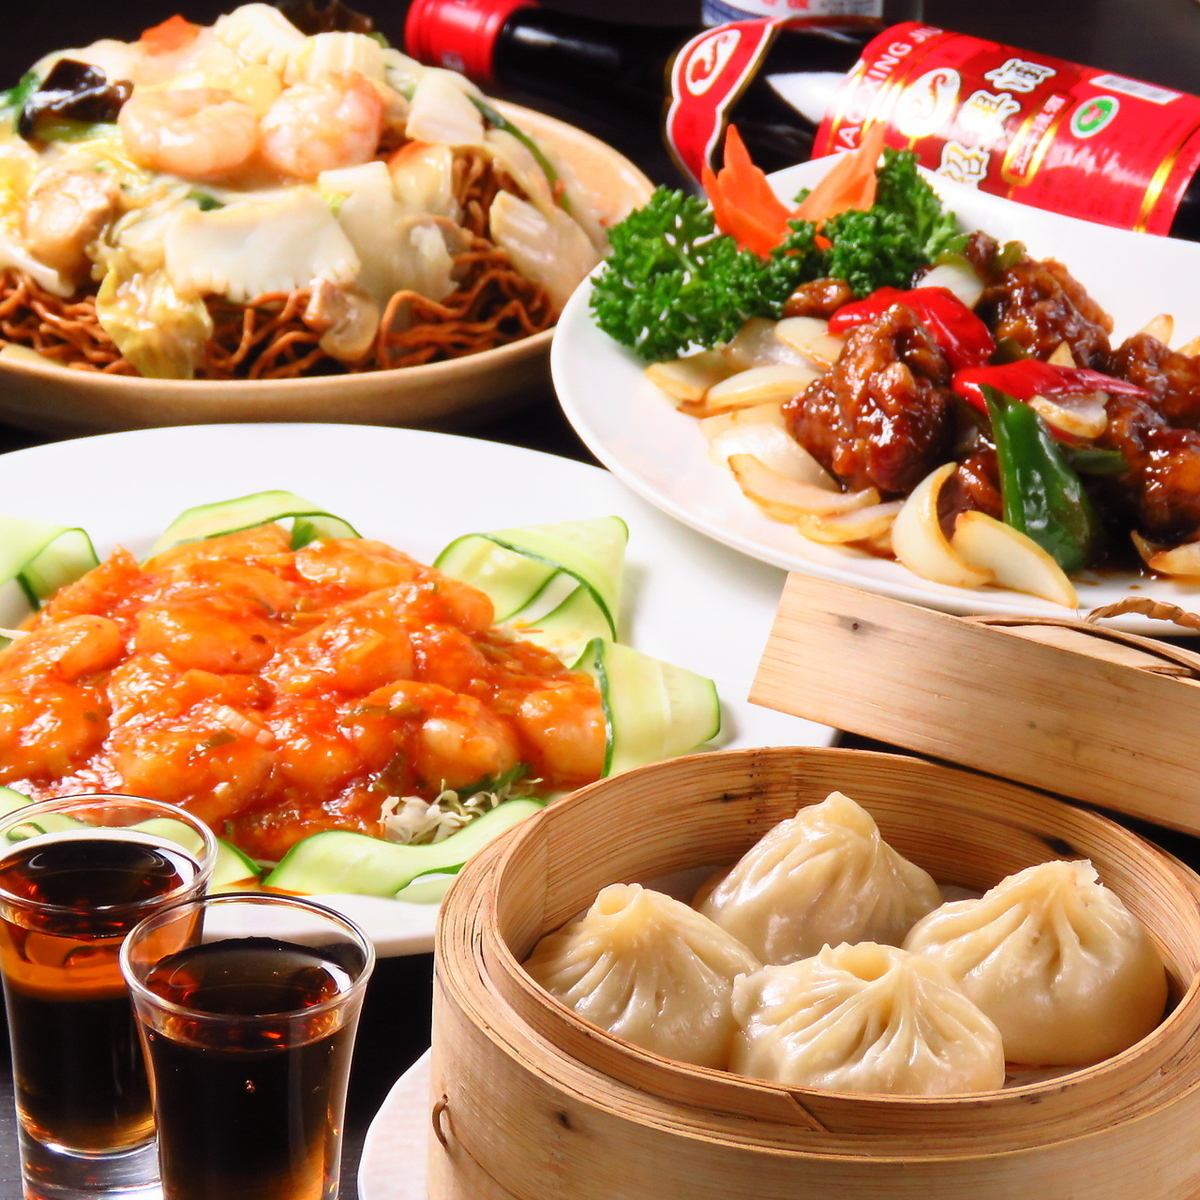 You can enjoy delicious Chinese food in a clean restaurant.Women are also welcome♪